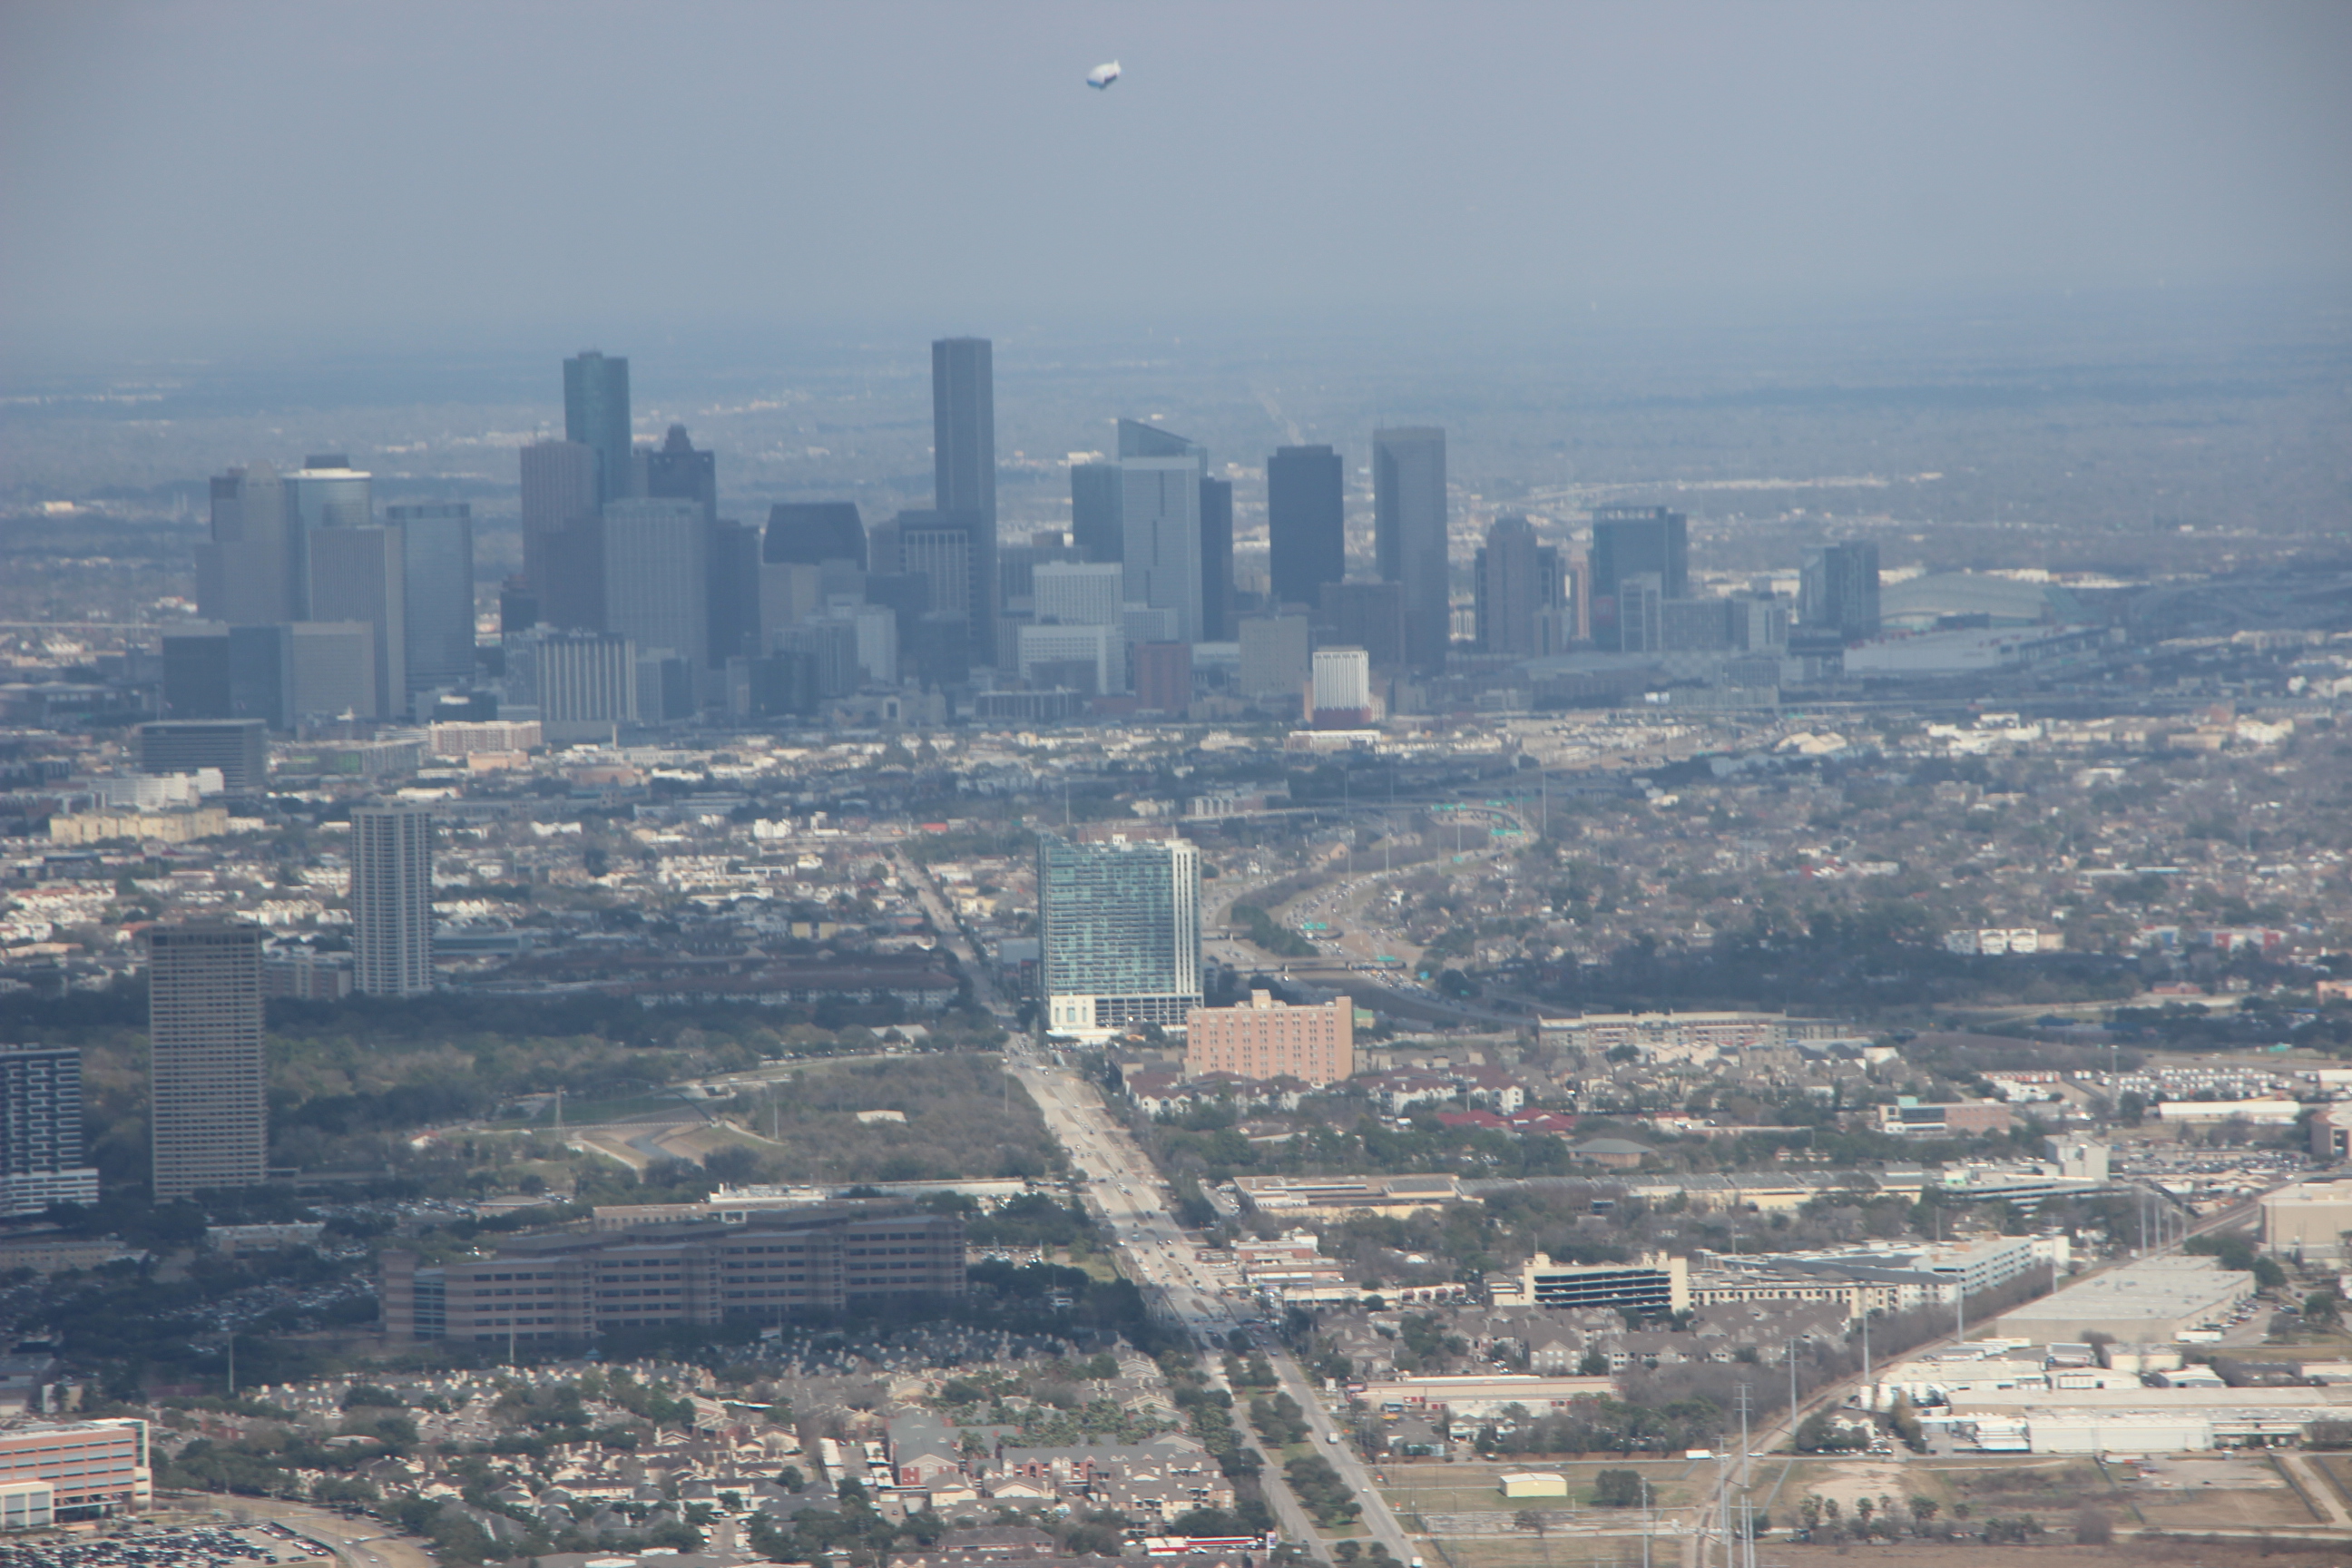 Houston's skyline from the air